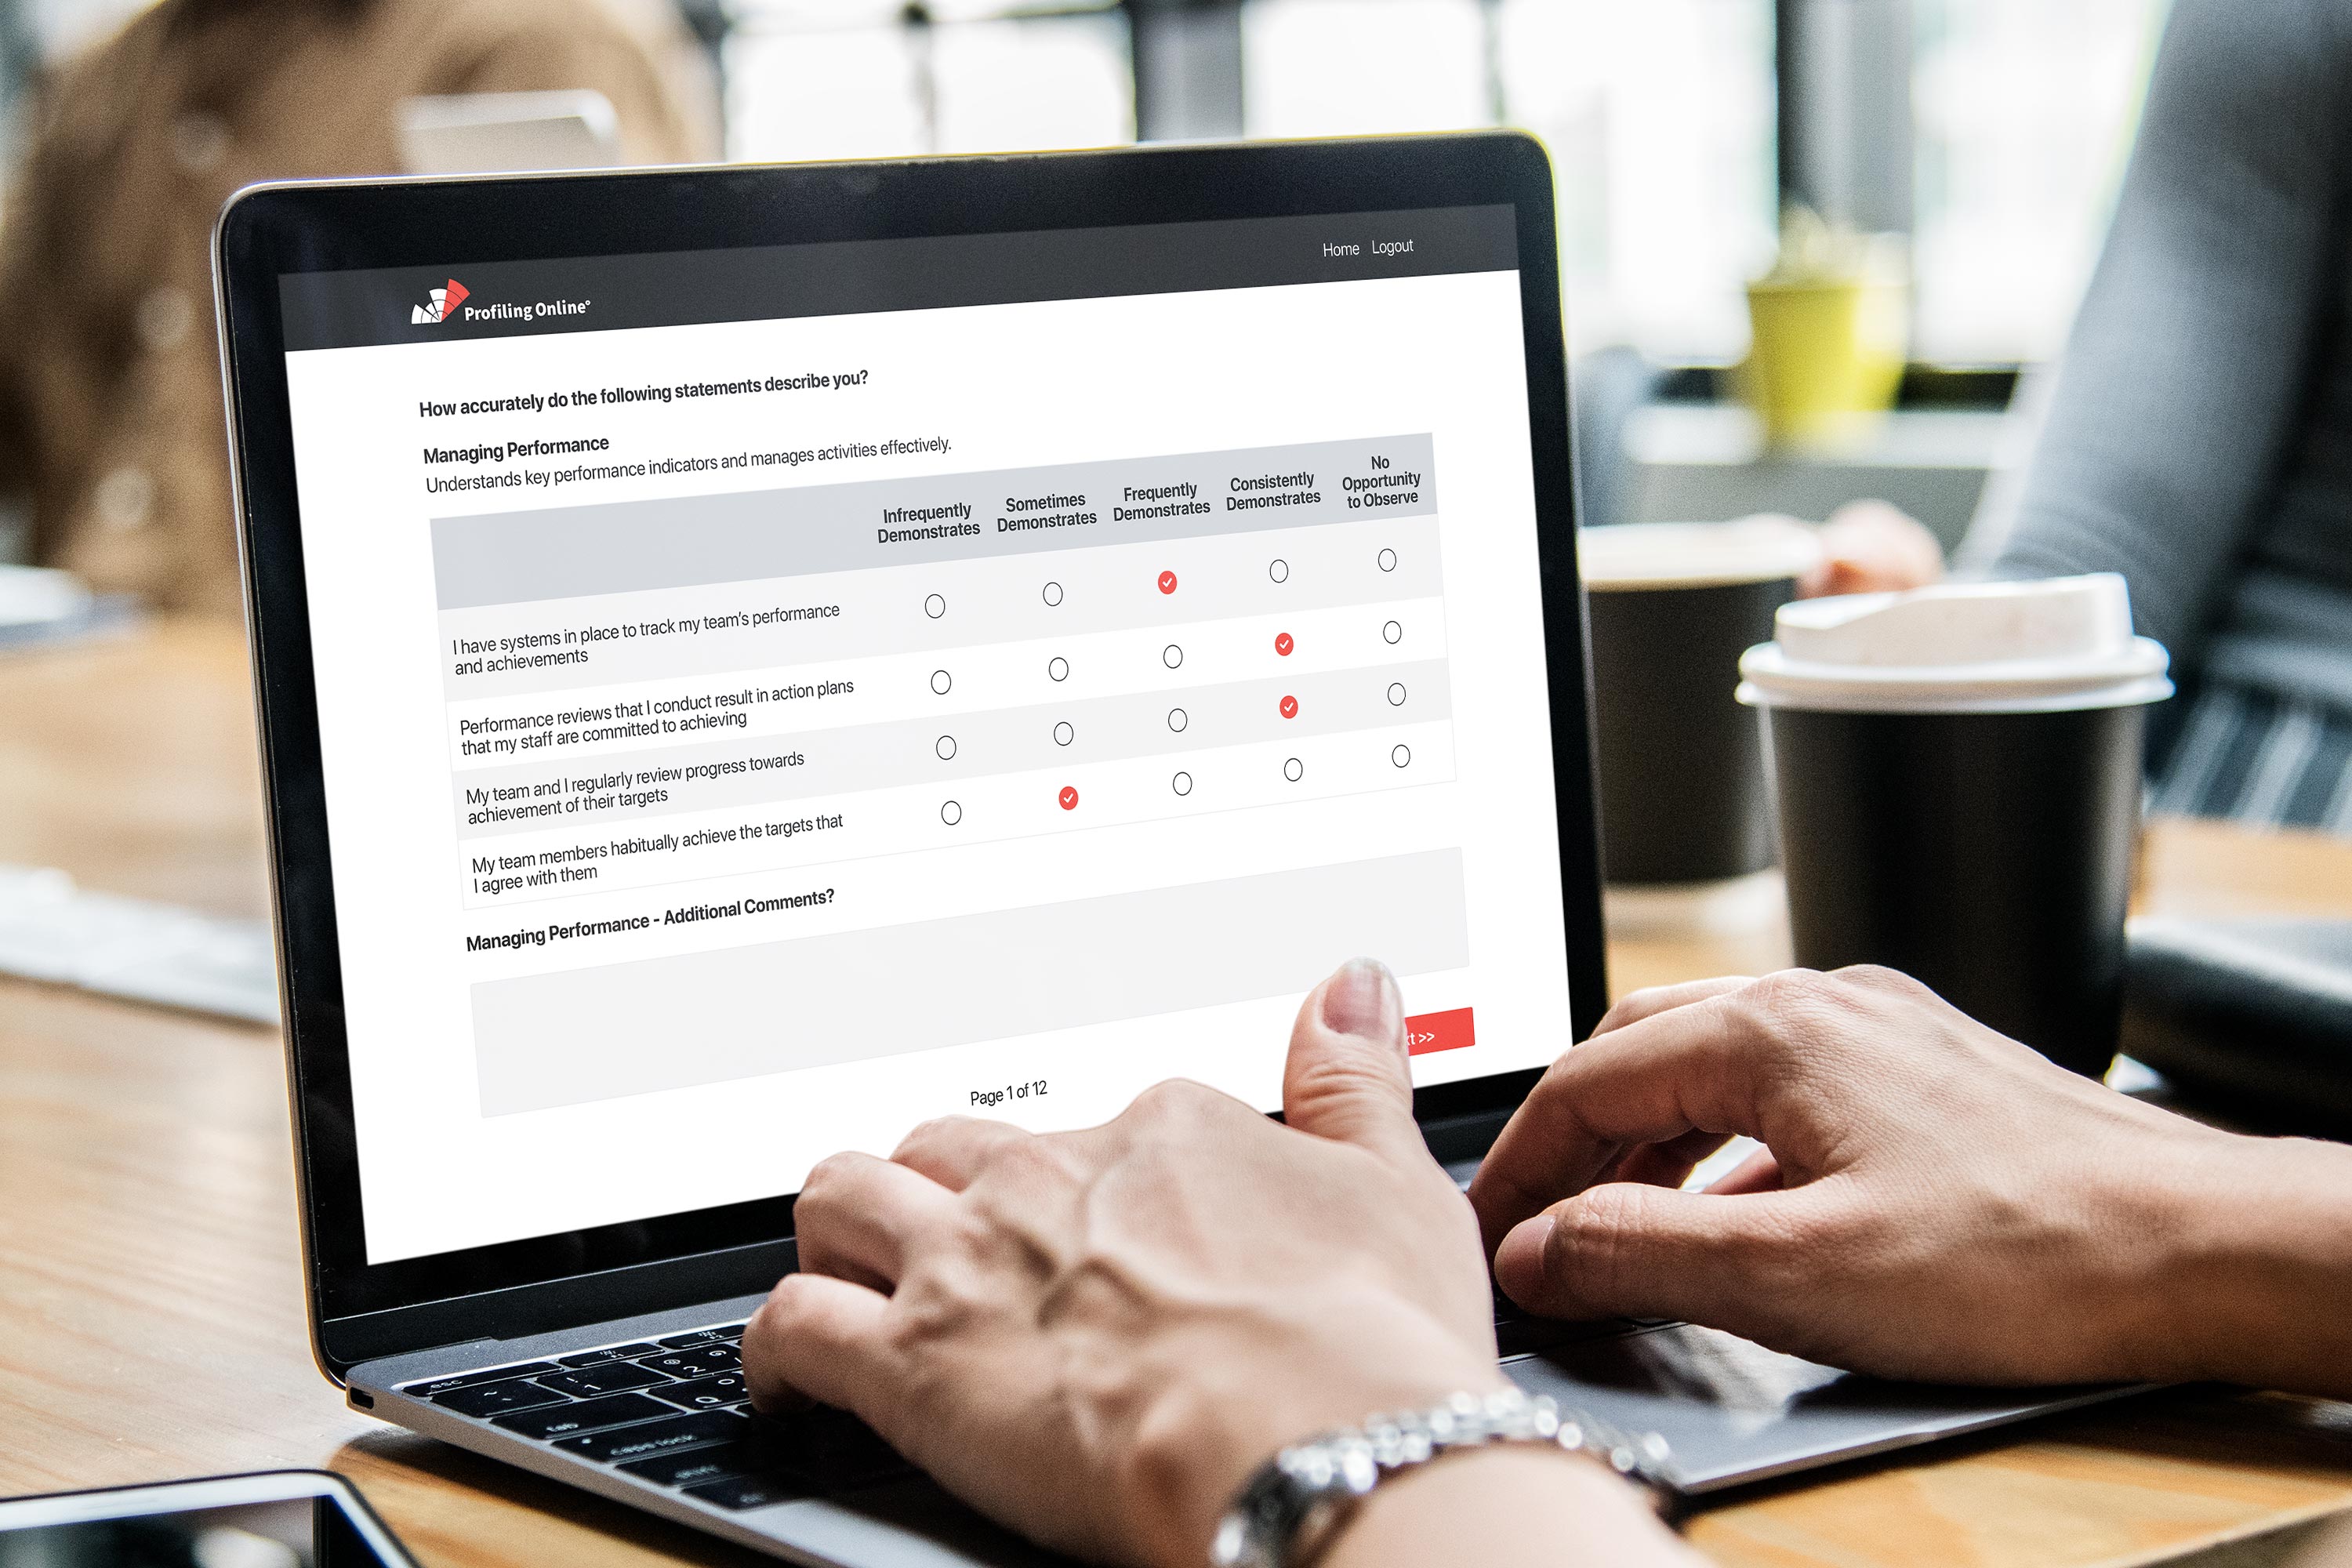 Build employee feedback surveys and competency assessments in a variety of formats. Using your competencies and survey items, define key survey attributes such as rating scale, language, respondent groups, and question type.